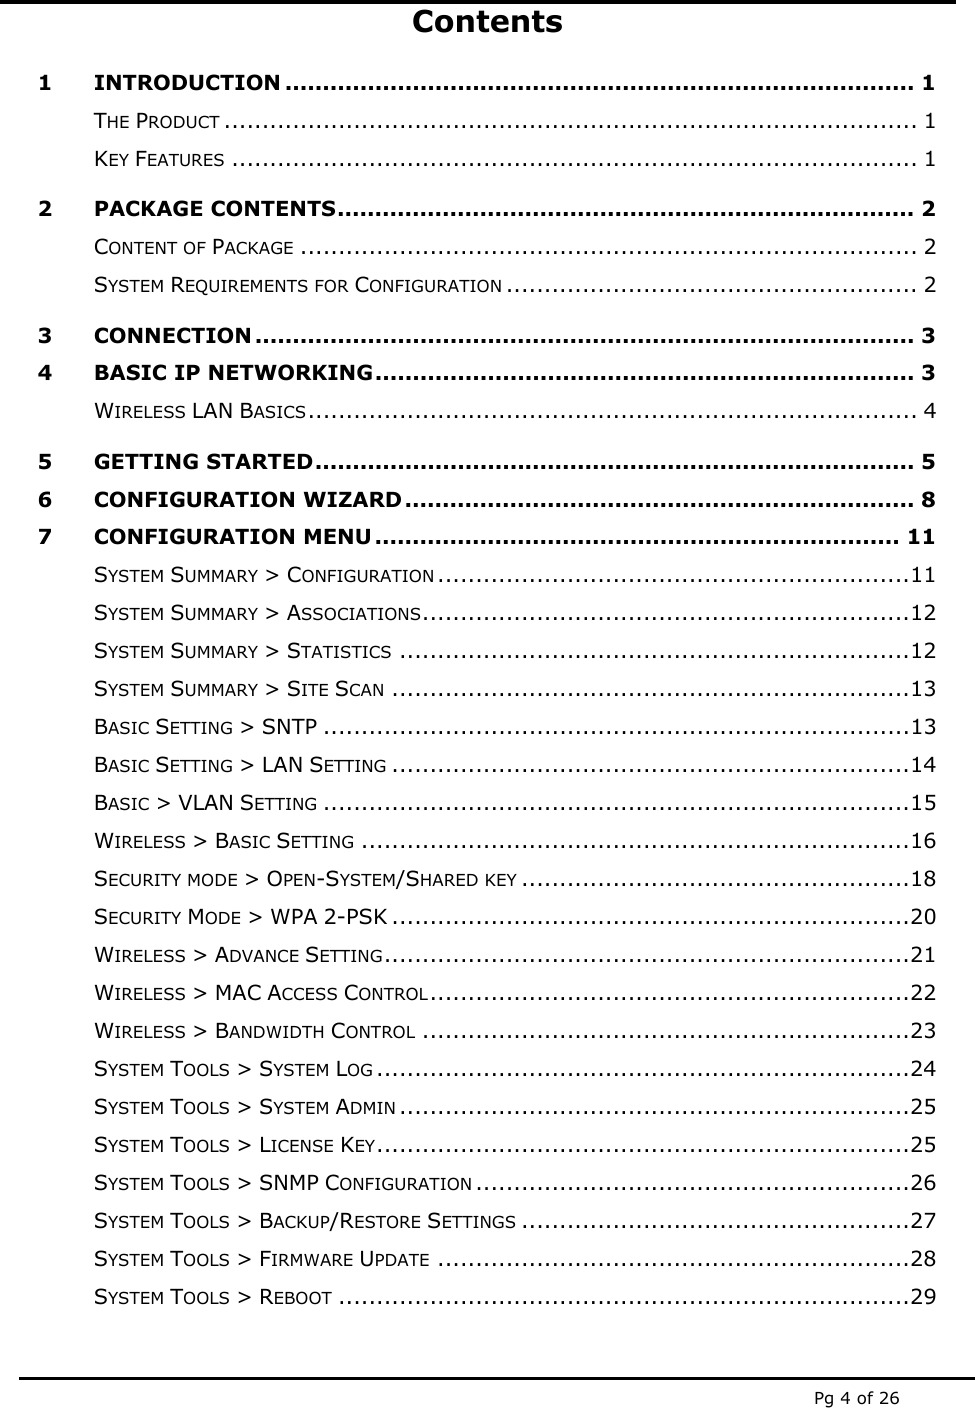  Pg 4 of 26 Contents 1 INTRODUCTION .................................................................................... 1 THE PRODUCT ........................................................................................... 1 KEY FEATURES .......................................................................................... 1 2 PACKAGE CONTENTS............................................................................. 2 CONTENT OF PACKAGE ................................................................................. 2 SYSTEM REQUIREMENTS FOR CONFIGURATION ...................................................... 2 3 CONNECTION ........................................................................................ 3 4 BASIC IP NETWORKING........................................................................ 3 WIRELESS LAN BASICS................................................................................ 4 5 GETTING STARTED................................................................................ 5 6 CONFIGURATION WIZARD.................................................................... 8 7 CONFIGURATION MENU ...................................................................... 11 SYSTEM SUMMARY &gt; CONFIGURATION ..............................................................11 SYSTEM SUMMARY &gt; ASSOCIATIONS................................................................12 SYSTEM SUMMARY &gt; STATISTICS ...................................................................12 SYSTEM SUMMARY &gt; SITE SCAN ....................................................................13 BASIC SETTING &gt; SNTP .............................................................................13 BASIC SETTING &gt; LAN SETTING ....................................................................14 BASIC &gt; VLAN SETTING .............................................................................15 WIRELESS &gt; BASIC SETTING ........................................................................16 SECURITY MODE &gt; OPEN-SYSTEM/SHARED KEY ...................................................18 SECURITY MODE &gt; WPA 2-PSK ....................................................................20 WIRELESS &gt; ADVANCE SETTING.....................................................................21 WIRELESS &gt; MAC ACCESS CONTROL...............................................................22 WIRELESS &gt; BANDWIDTH CONTROL ................................................................23 SYSTEM TOOLS &gt; SYSTEM LOG ......................................................................24 SYSTEM TOOLS &gt; SYSTEM ADMIN ...................................................................25 SYSTEM TOOLS &gt; LICENSE KEY......................................................................25 SYSTEM TOOLS &gt; SNMP CONFIGURATION .........................................................26 SYSTEM TOOLS &gt; BACKUP/RESTORE SETTINGS ...................................................27 SYSTEM TOOLS &gt; FIRMWARE UPDATE ..............................................................28 SYSTEM TOOLS &gt; REBOOT ...........................................................................29 